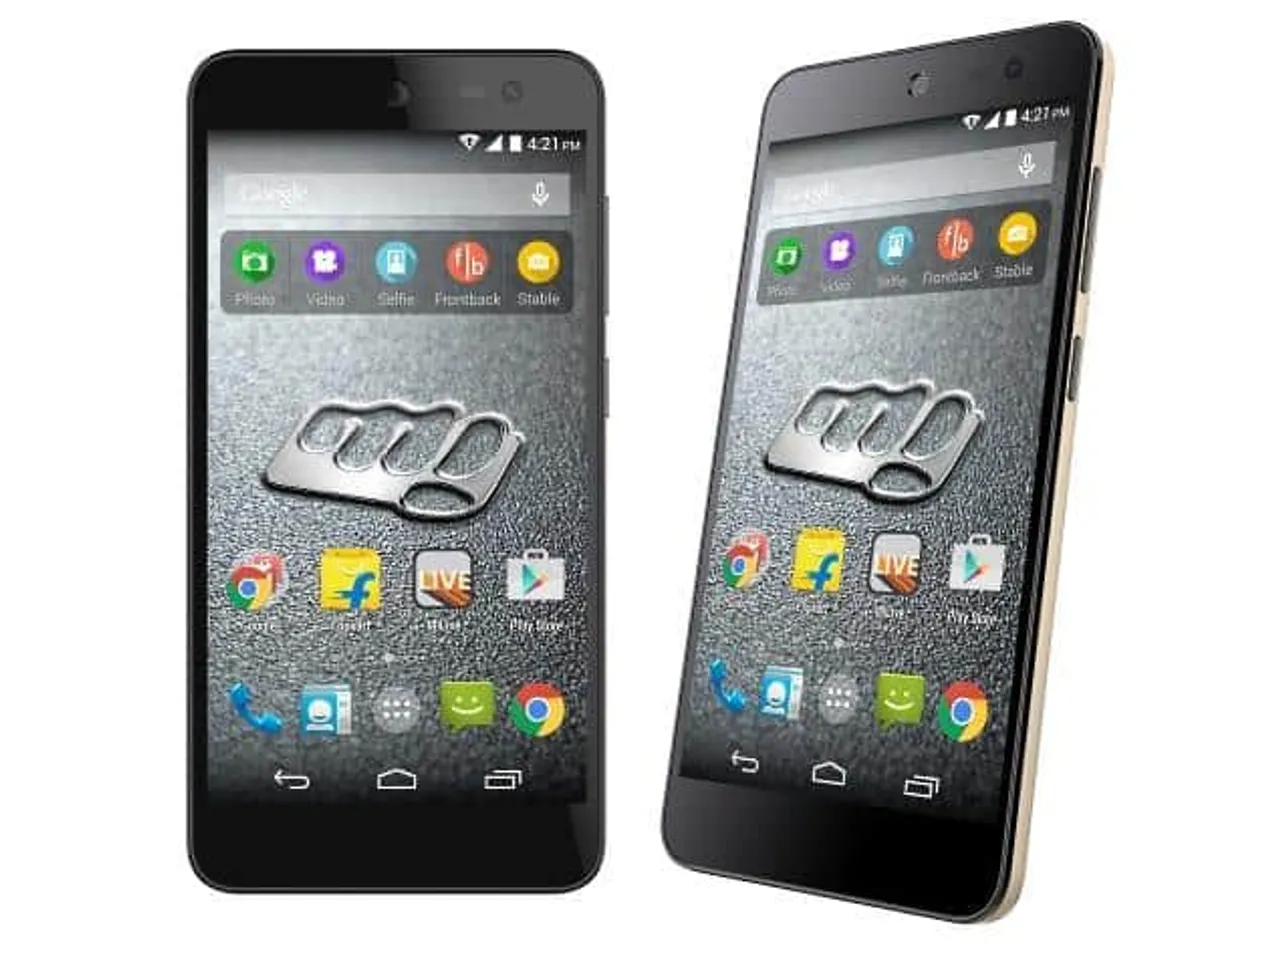 Micromax Canvas Xpress 2 priced at Rs 5,999 goes on sale on Flipkart on August 25